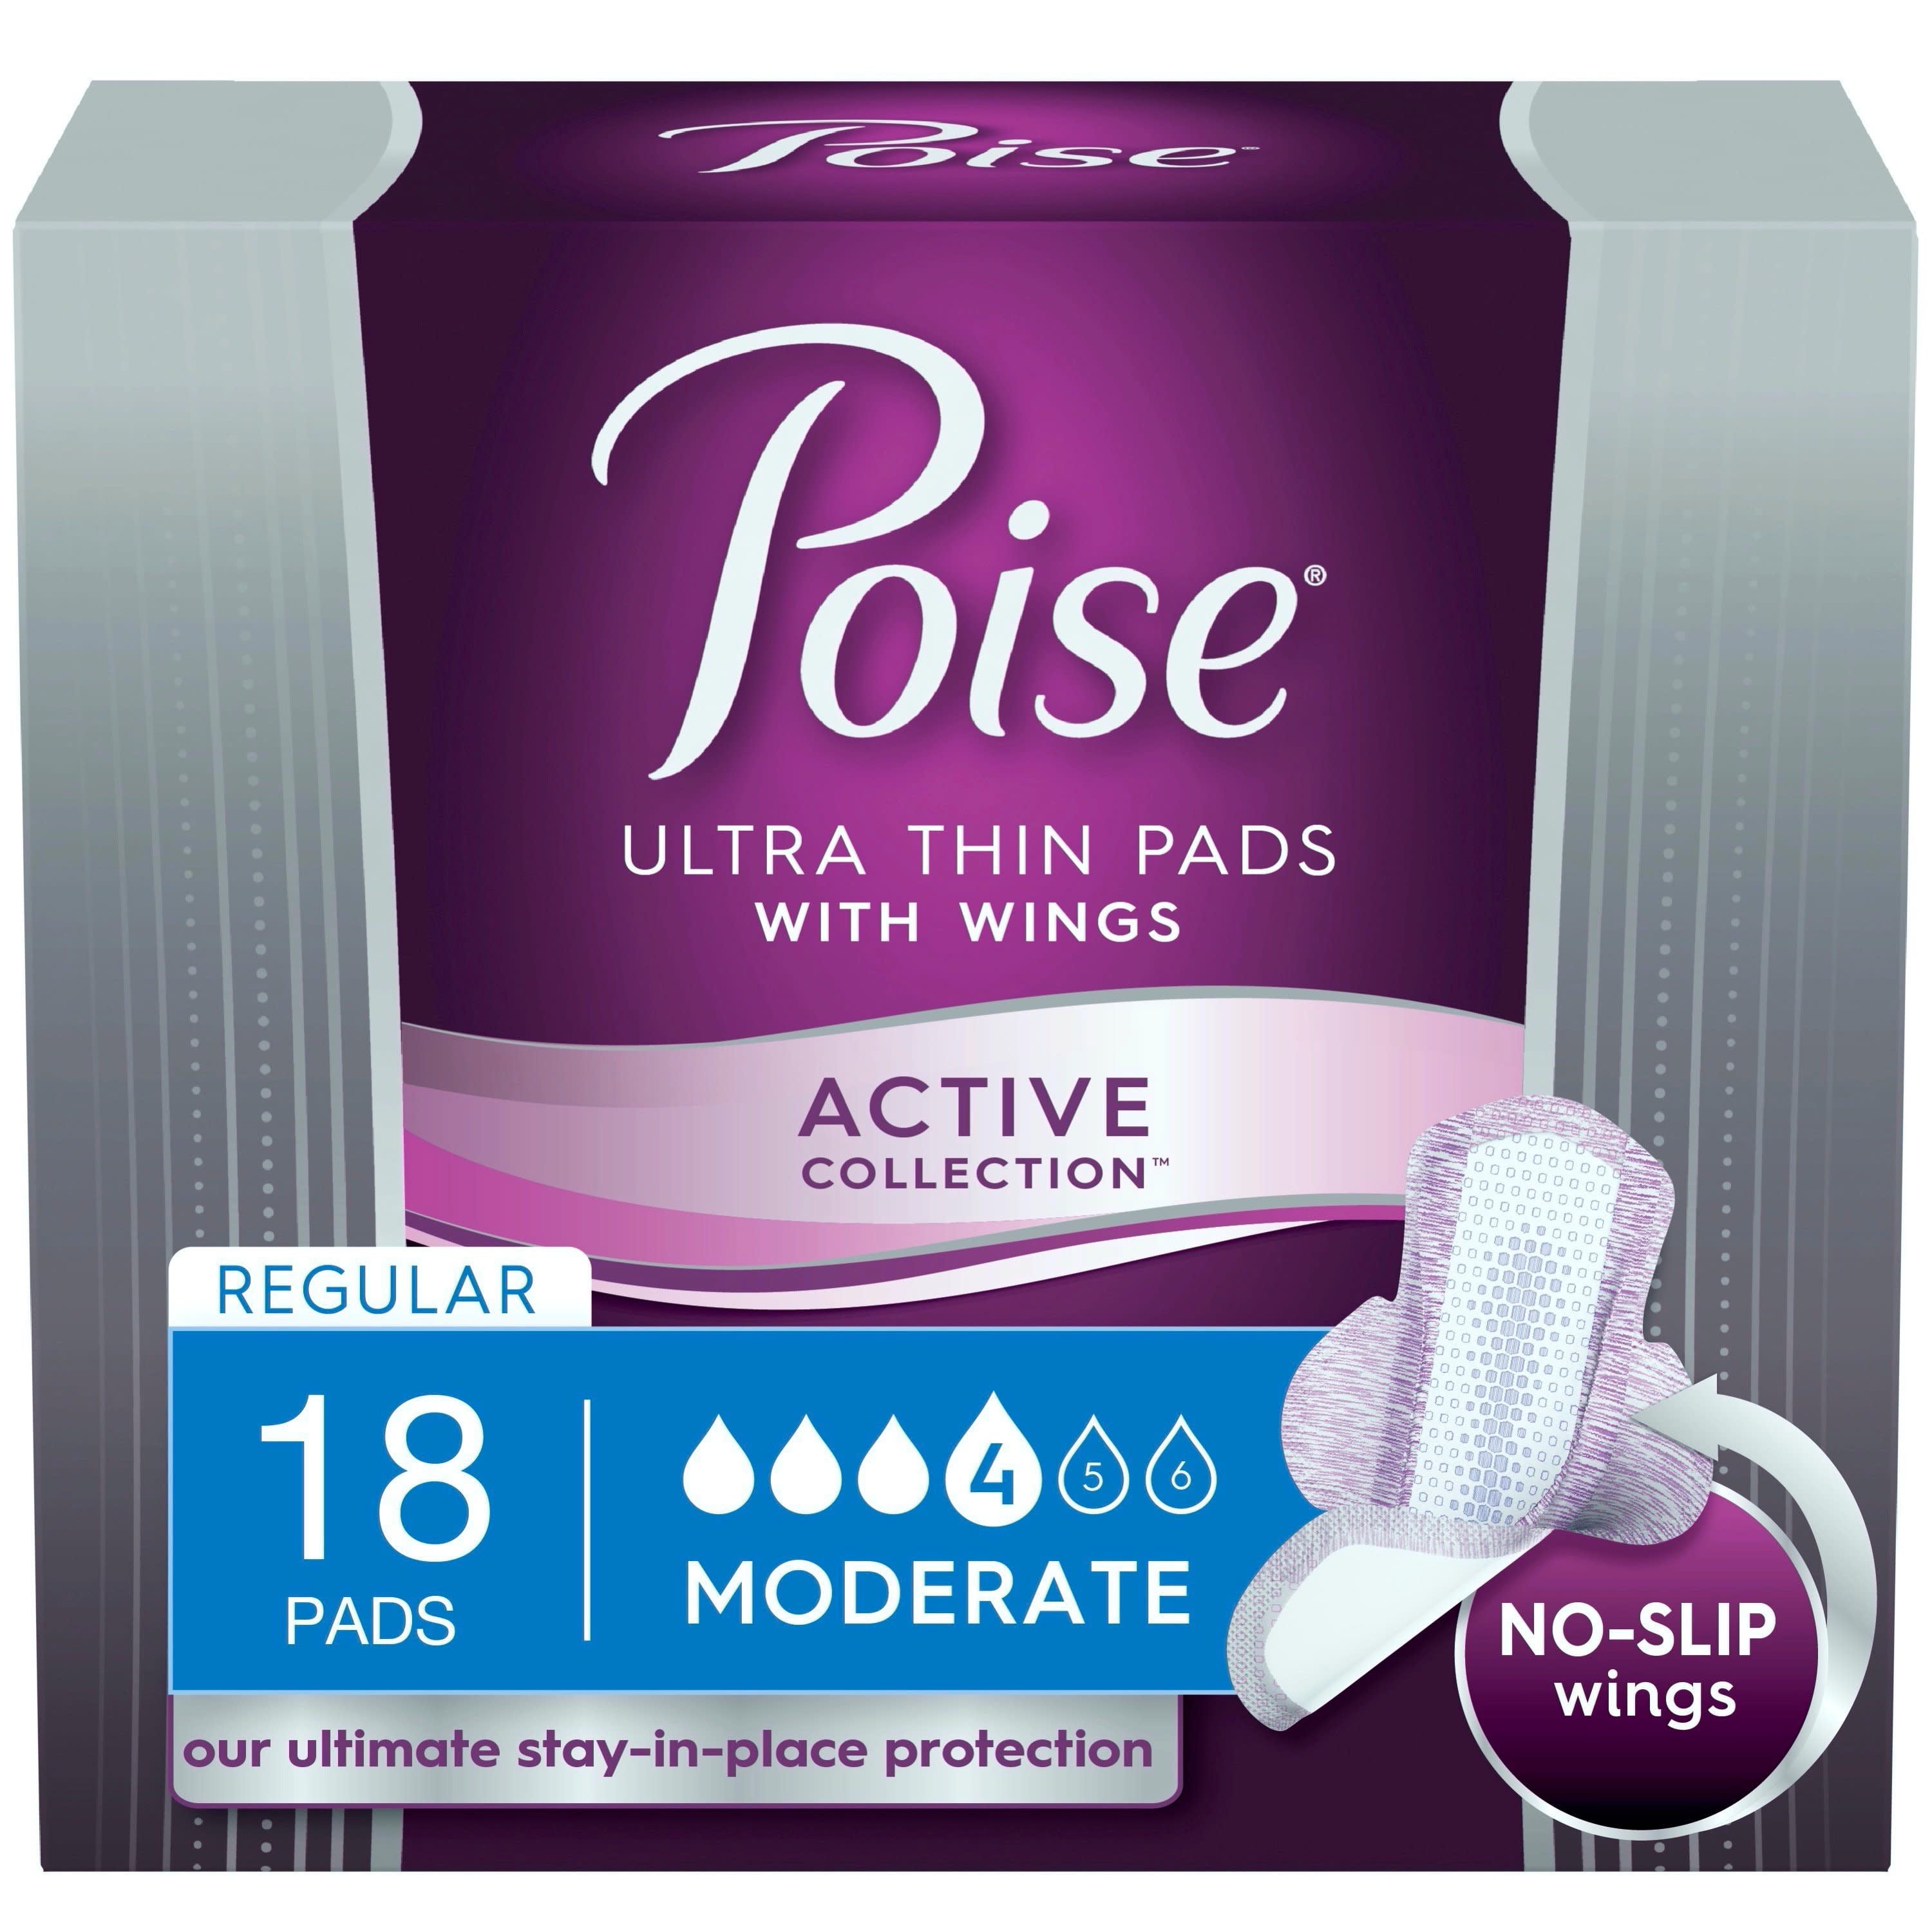 poise-ultra-thin-incontinence-pads-with-wings-active-collection